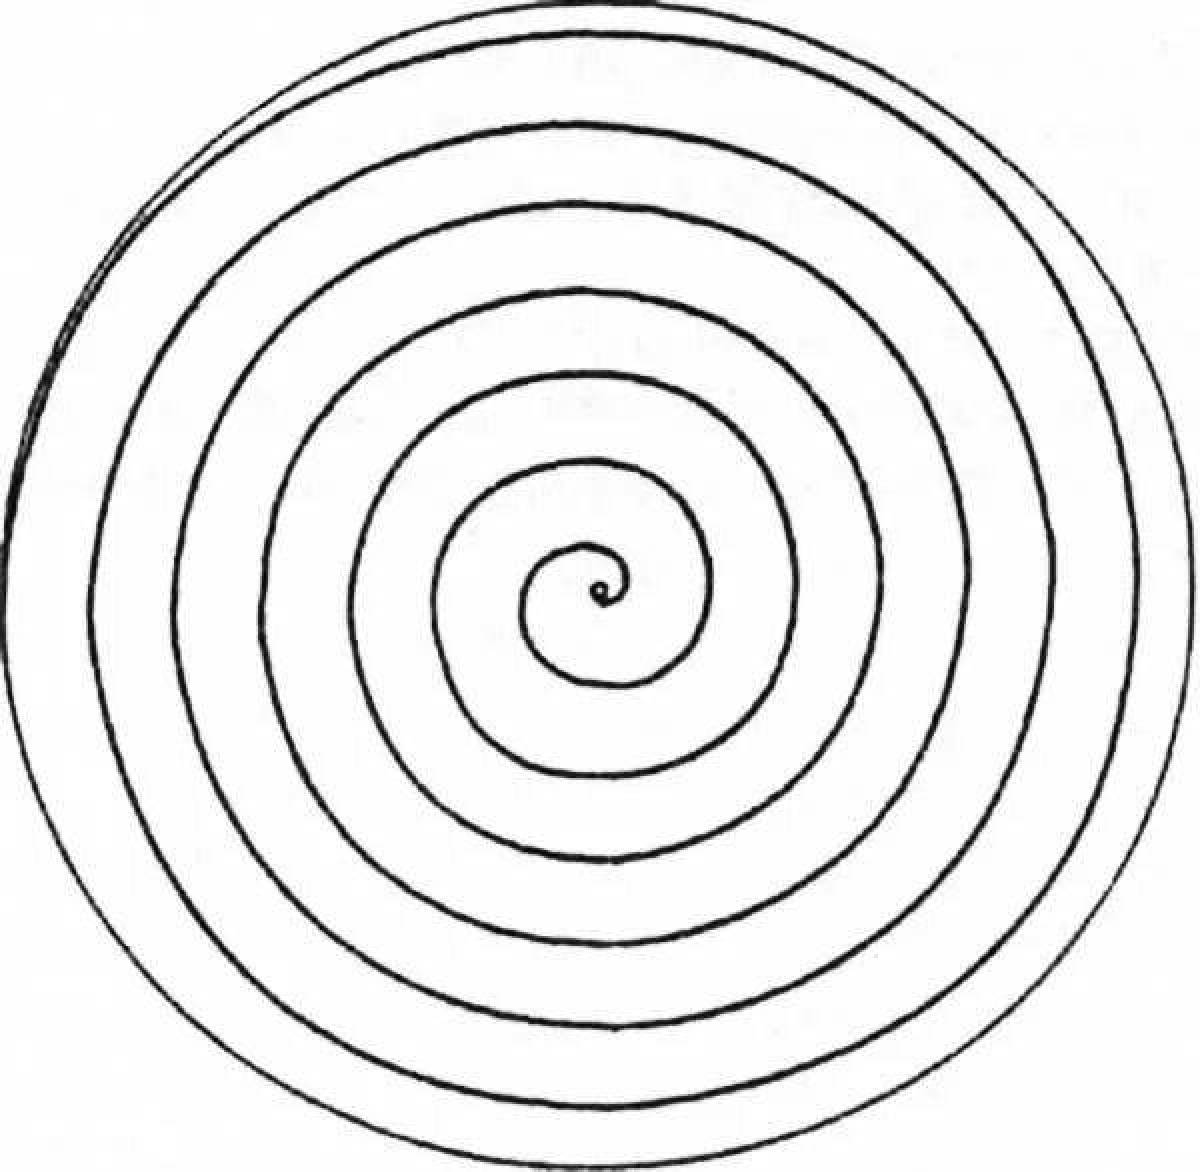 Brilliantly drawn spiral coloring